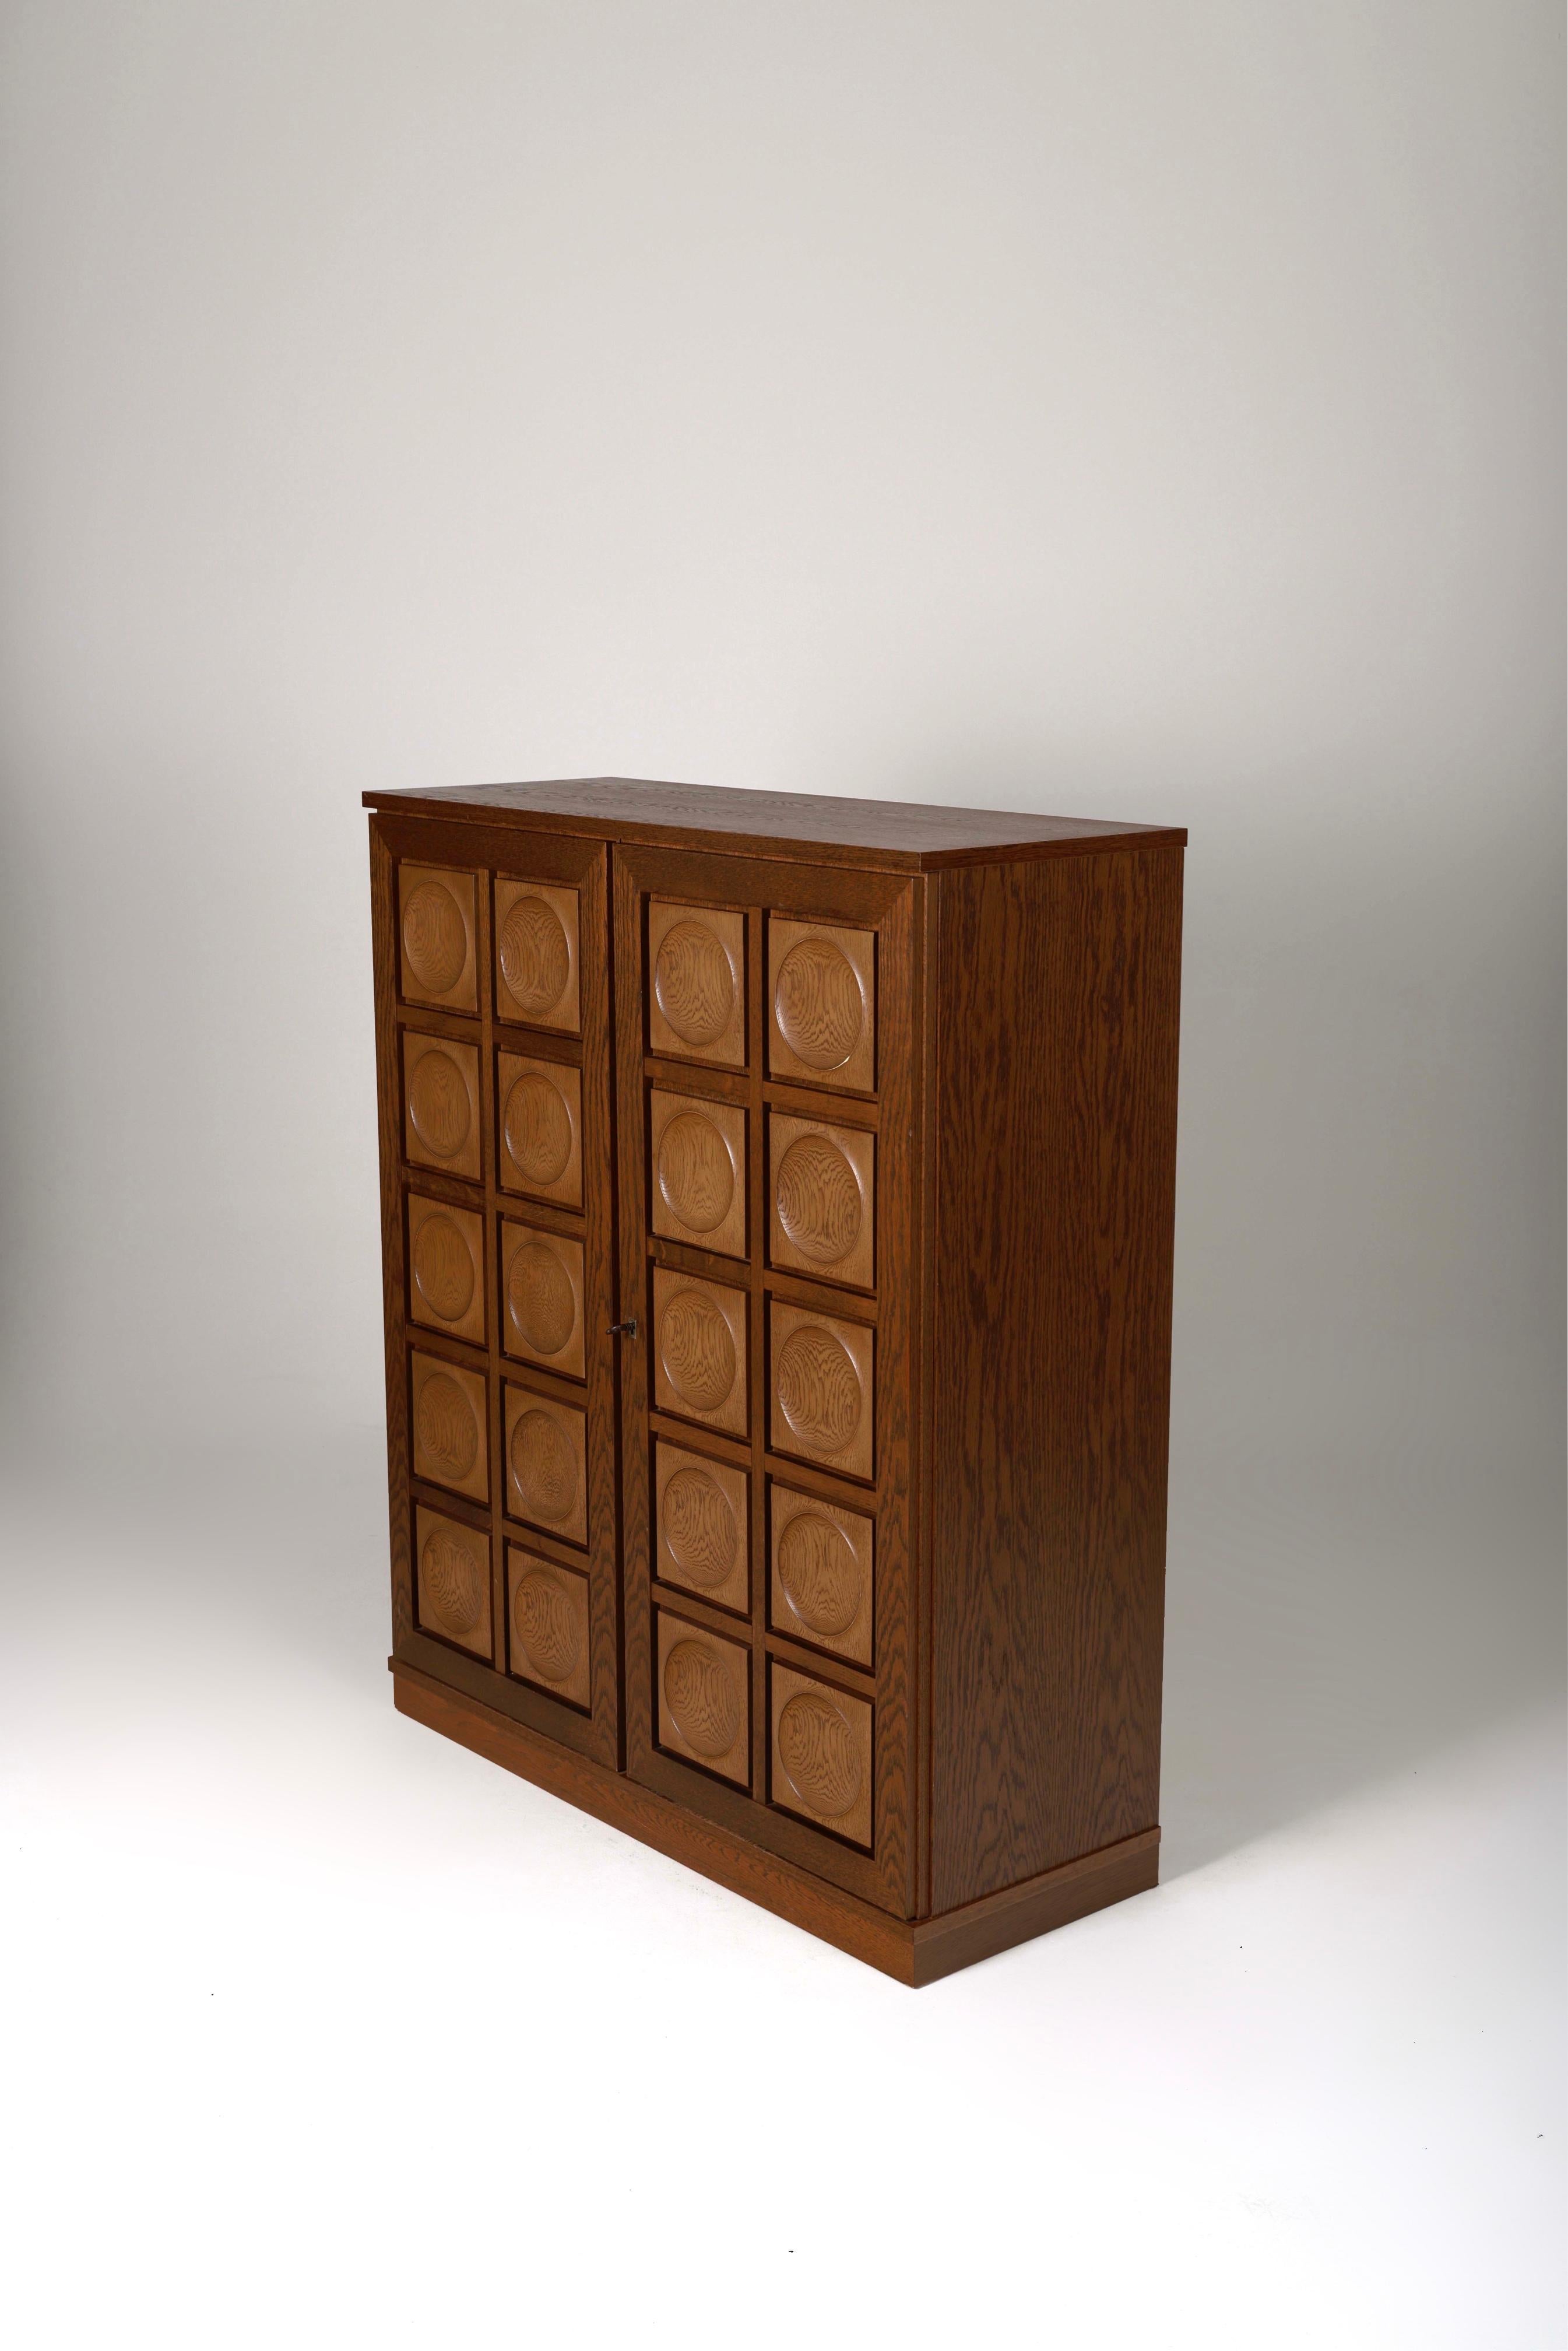 High brutalist enfilade by gerhard bartels. From the 70s, Belgium. Oak sideboard with 2 doors with circular patterns. Very good condition.
LP1103